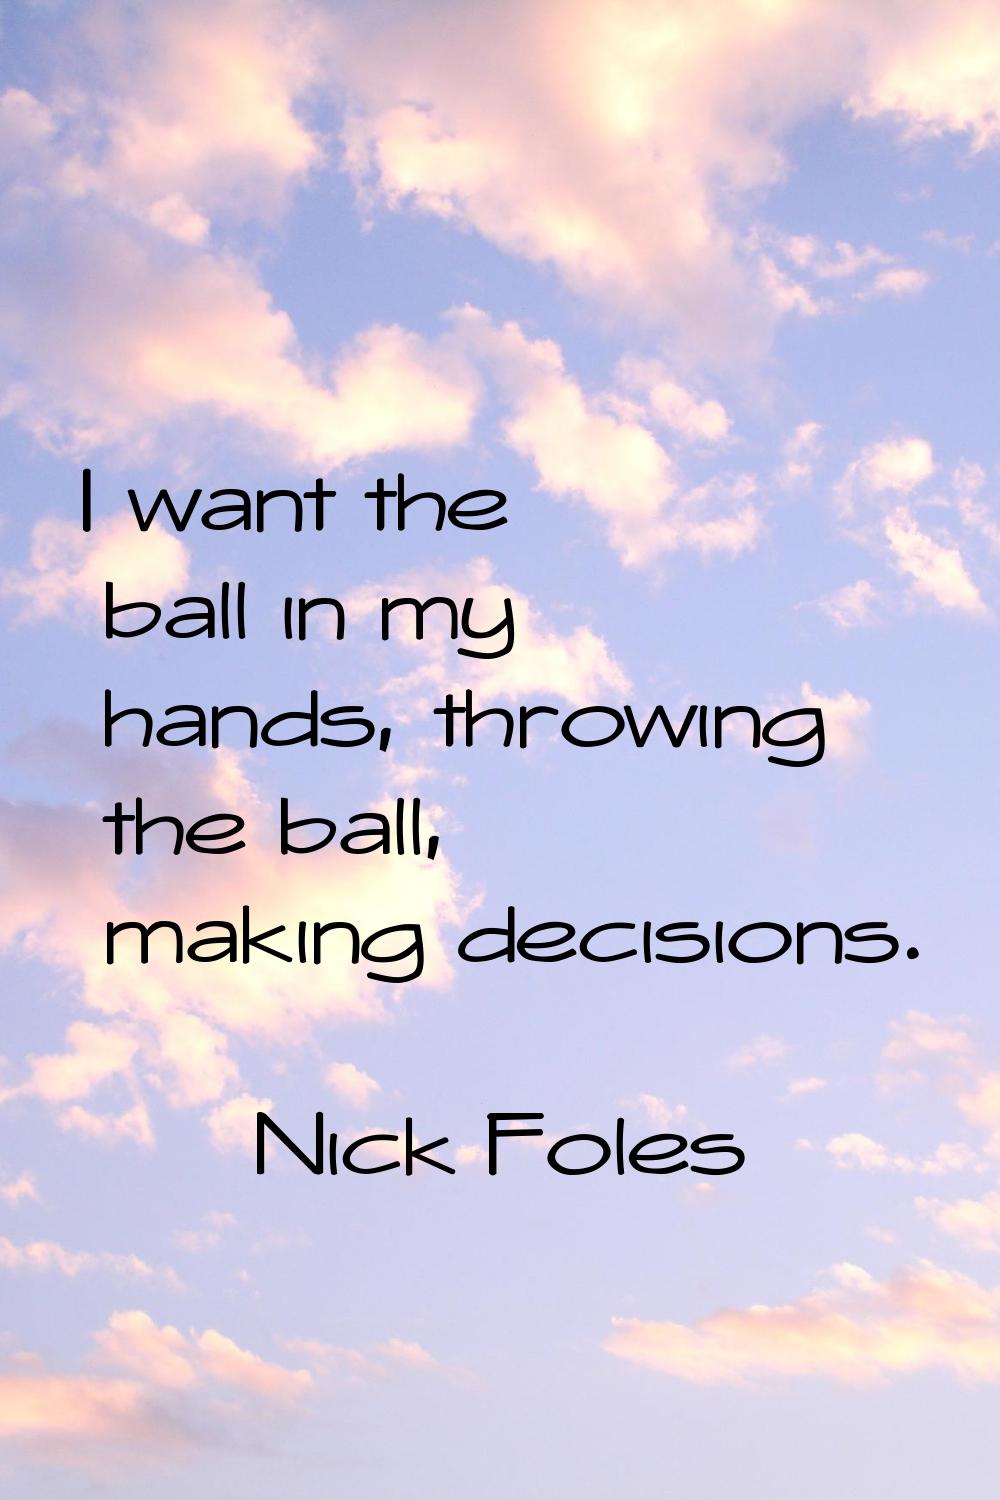 I want the ball in my hands, throwing the ball, making decisions.